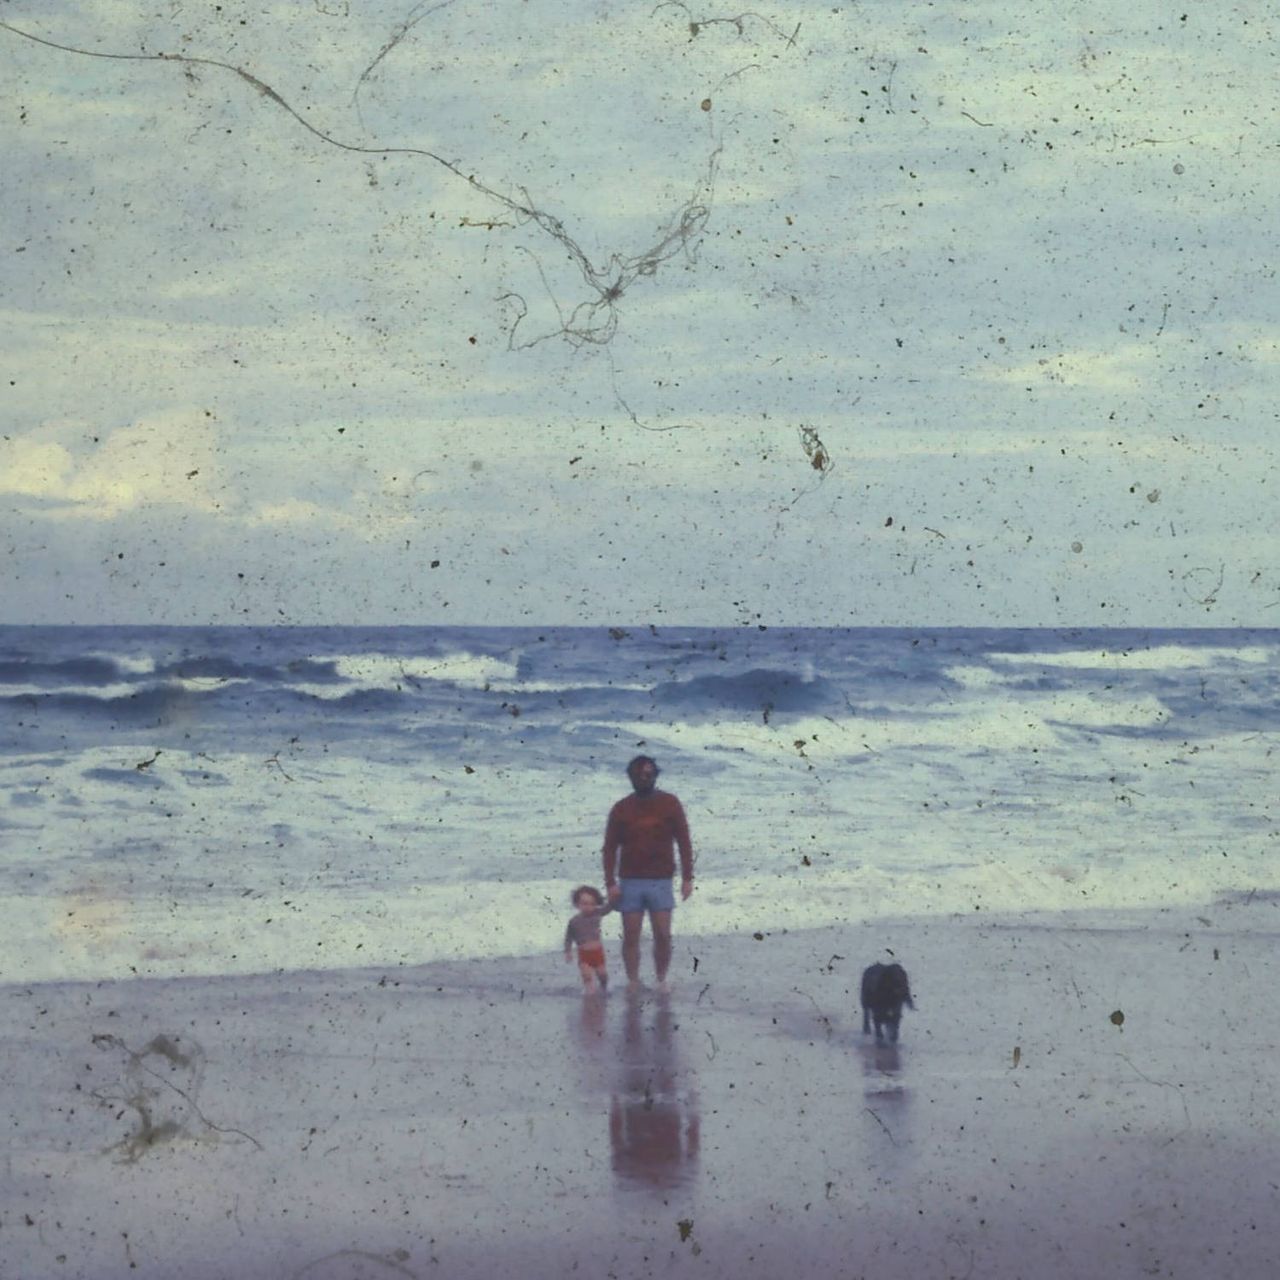 An old and degraded photograph of a boy, a man and a dog on a beach.